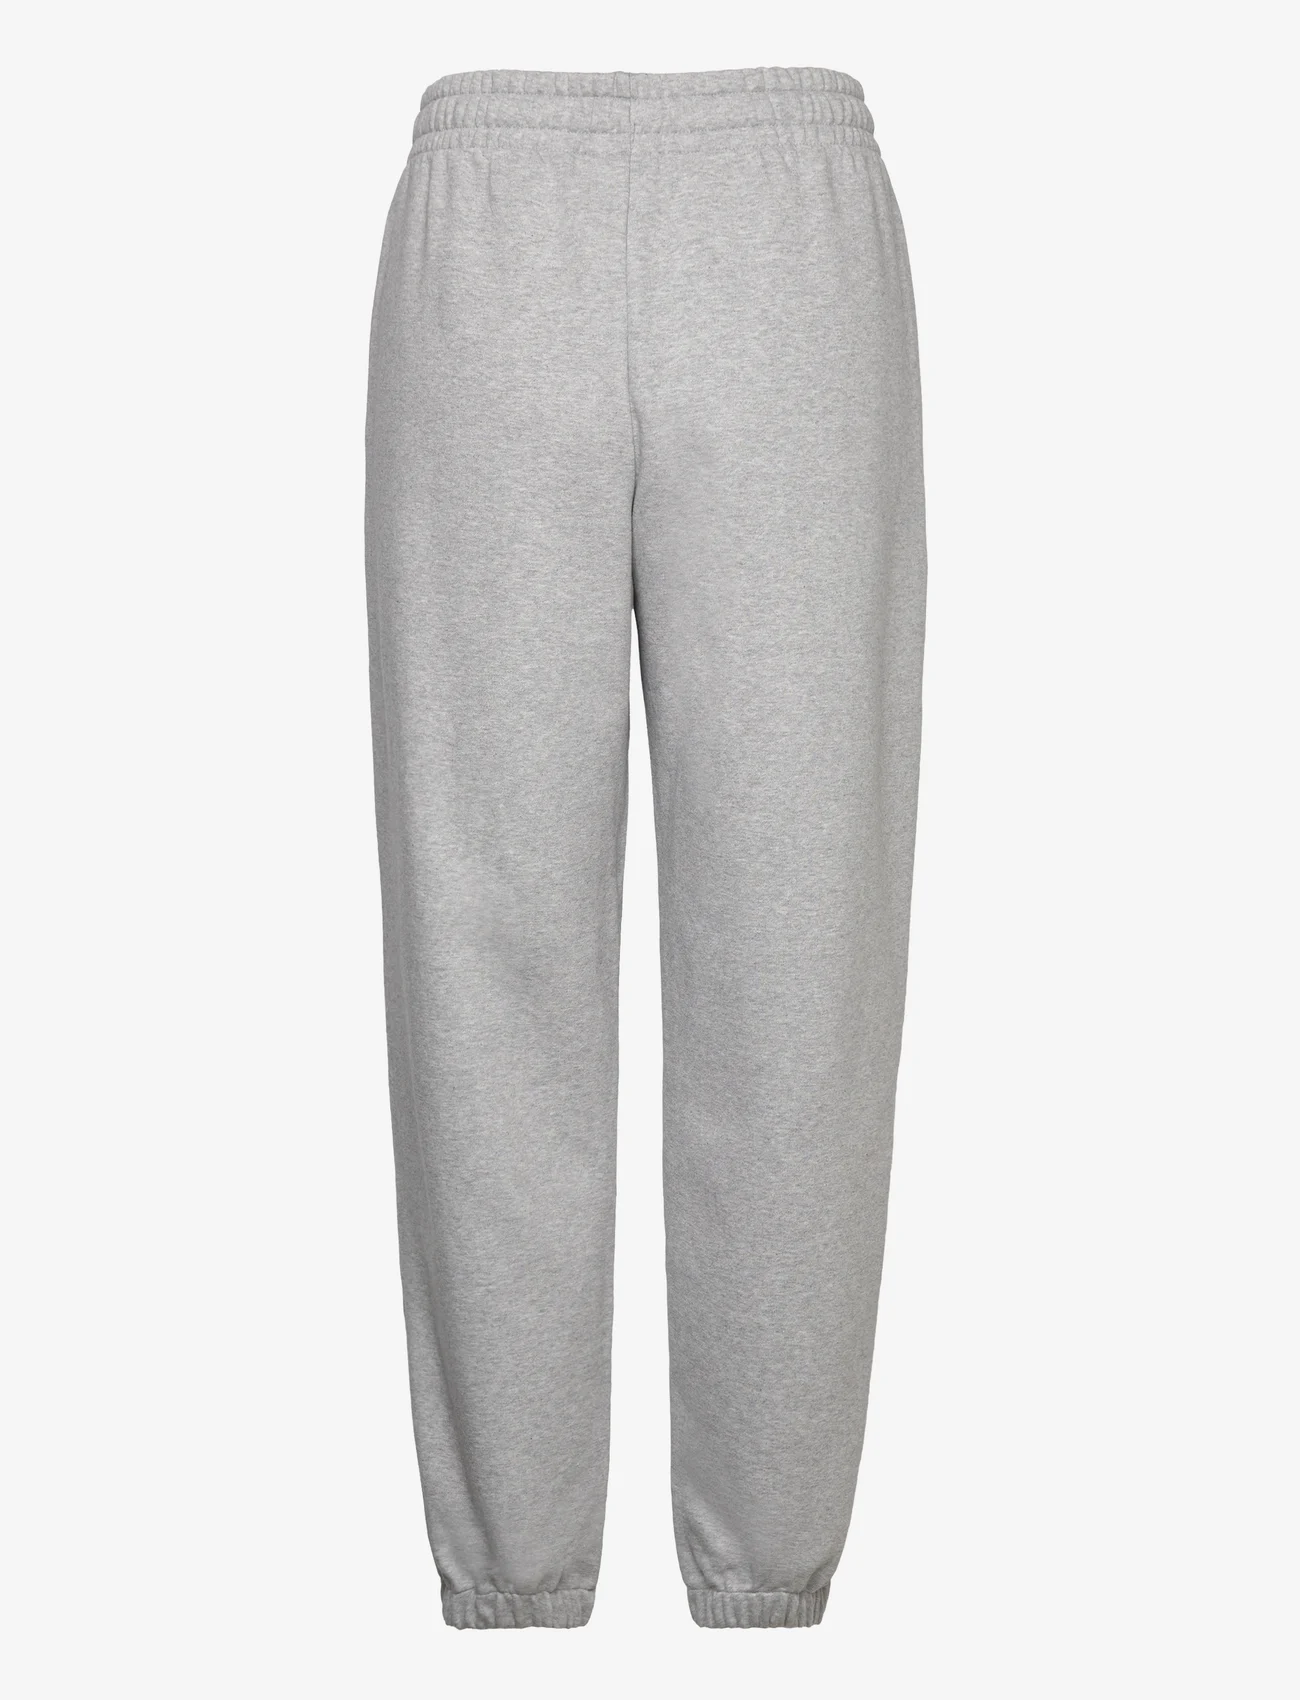 New Balance - Essentials Stacked Logo French Terry Sweatpant - athletic grey - 1